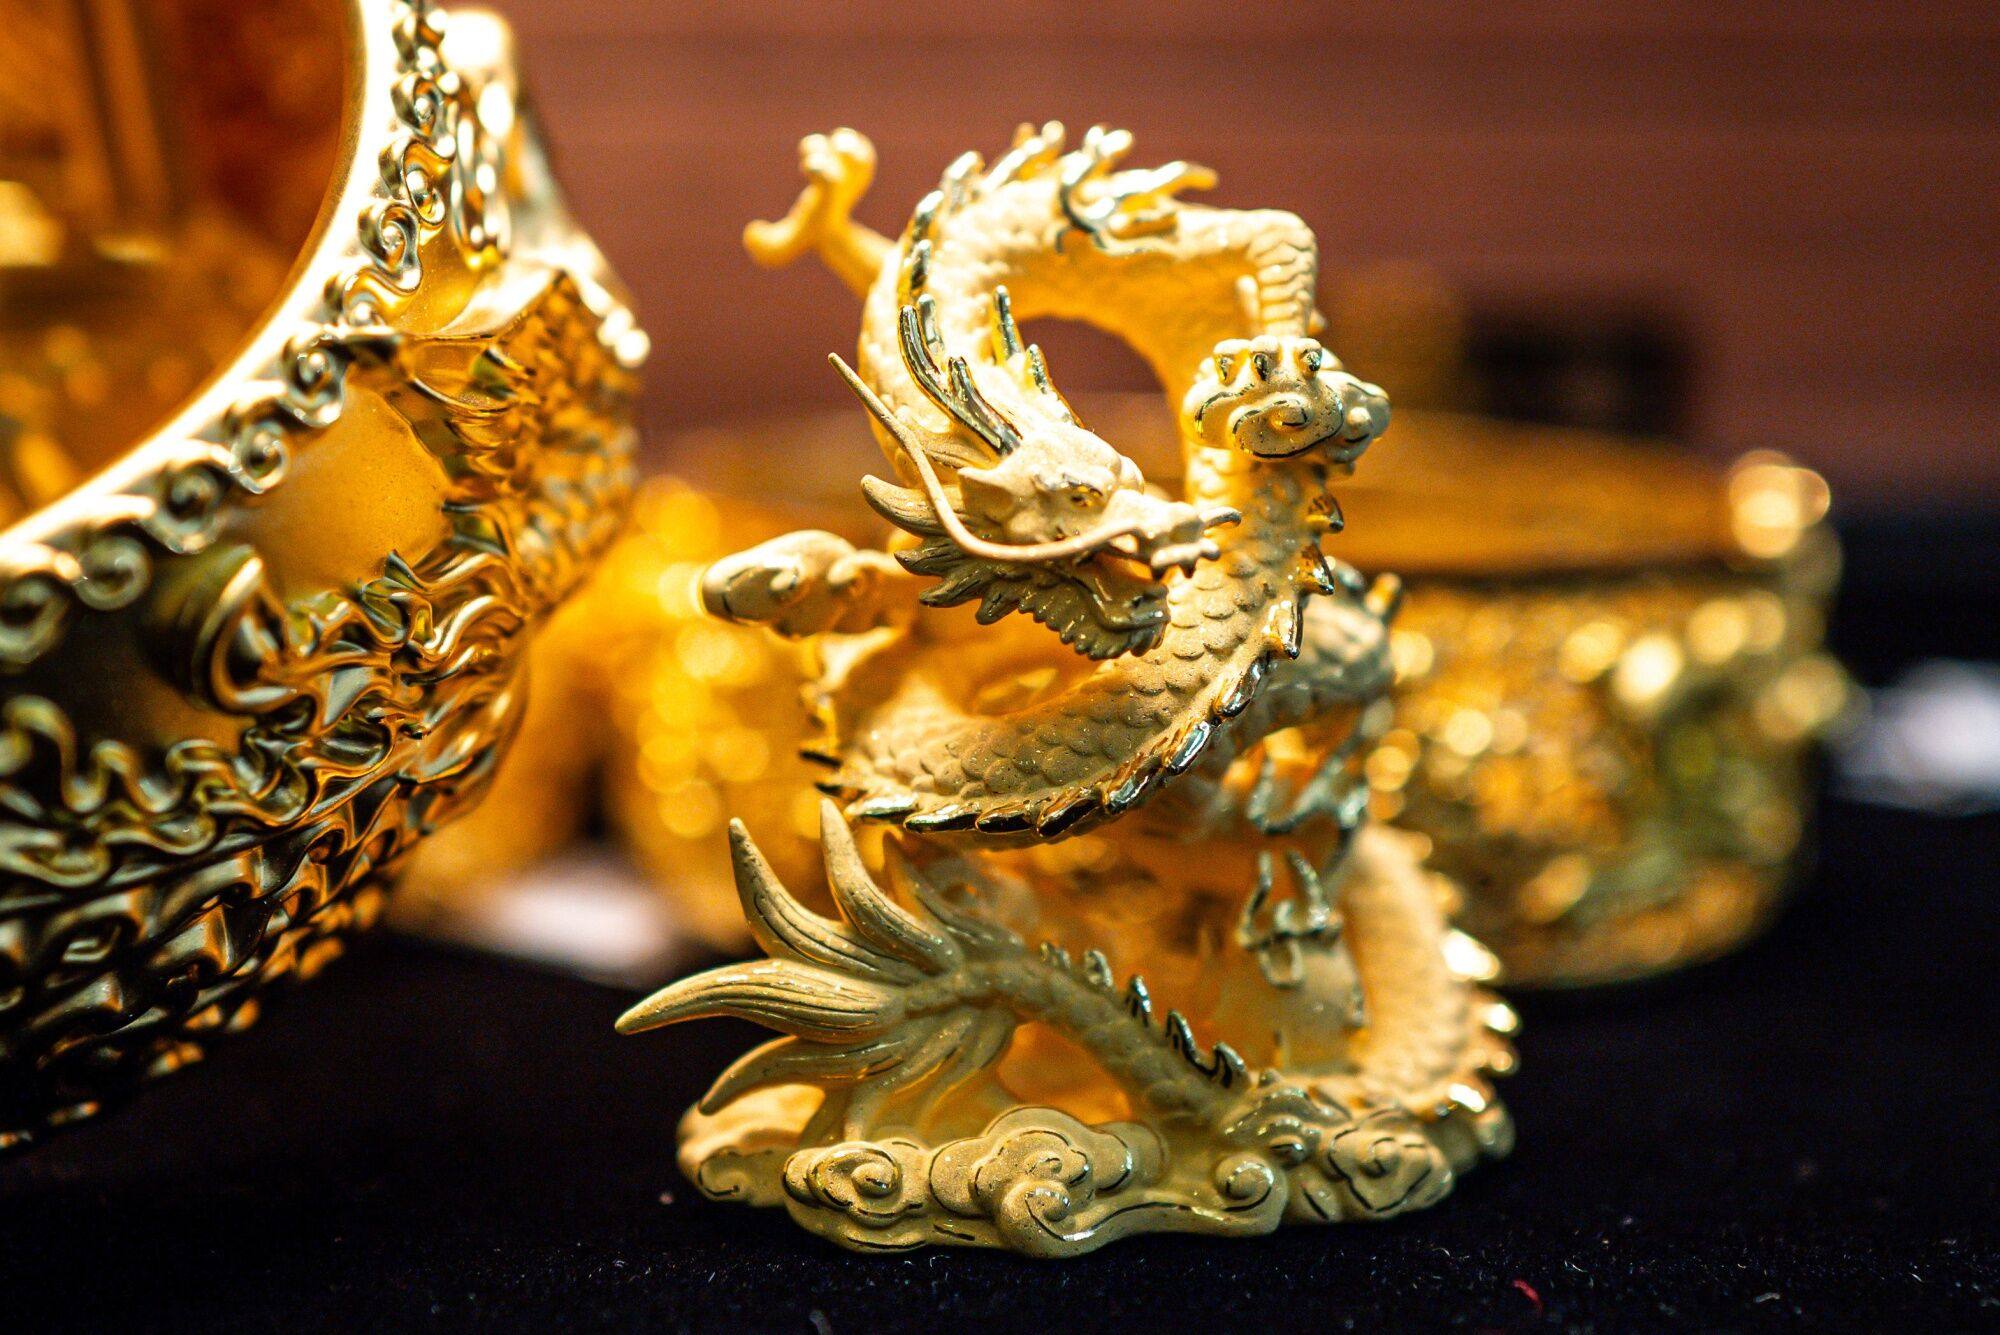 Gold has gained popularity among Chinese investors keen on preserving their wealth. Photo: Bloomberg